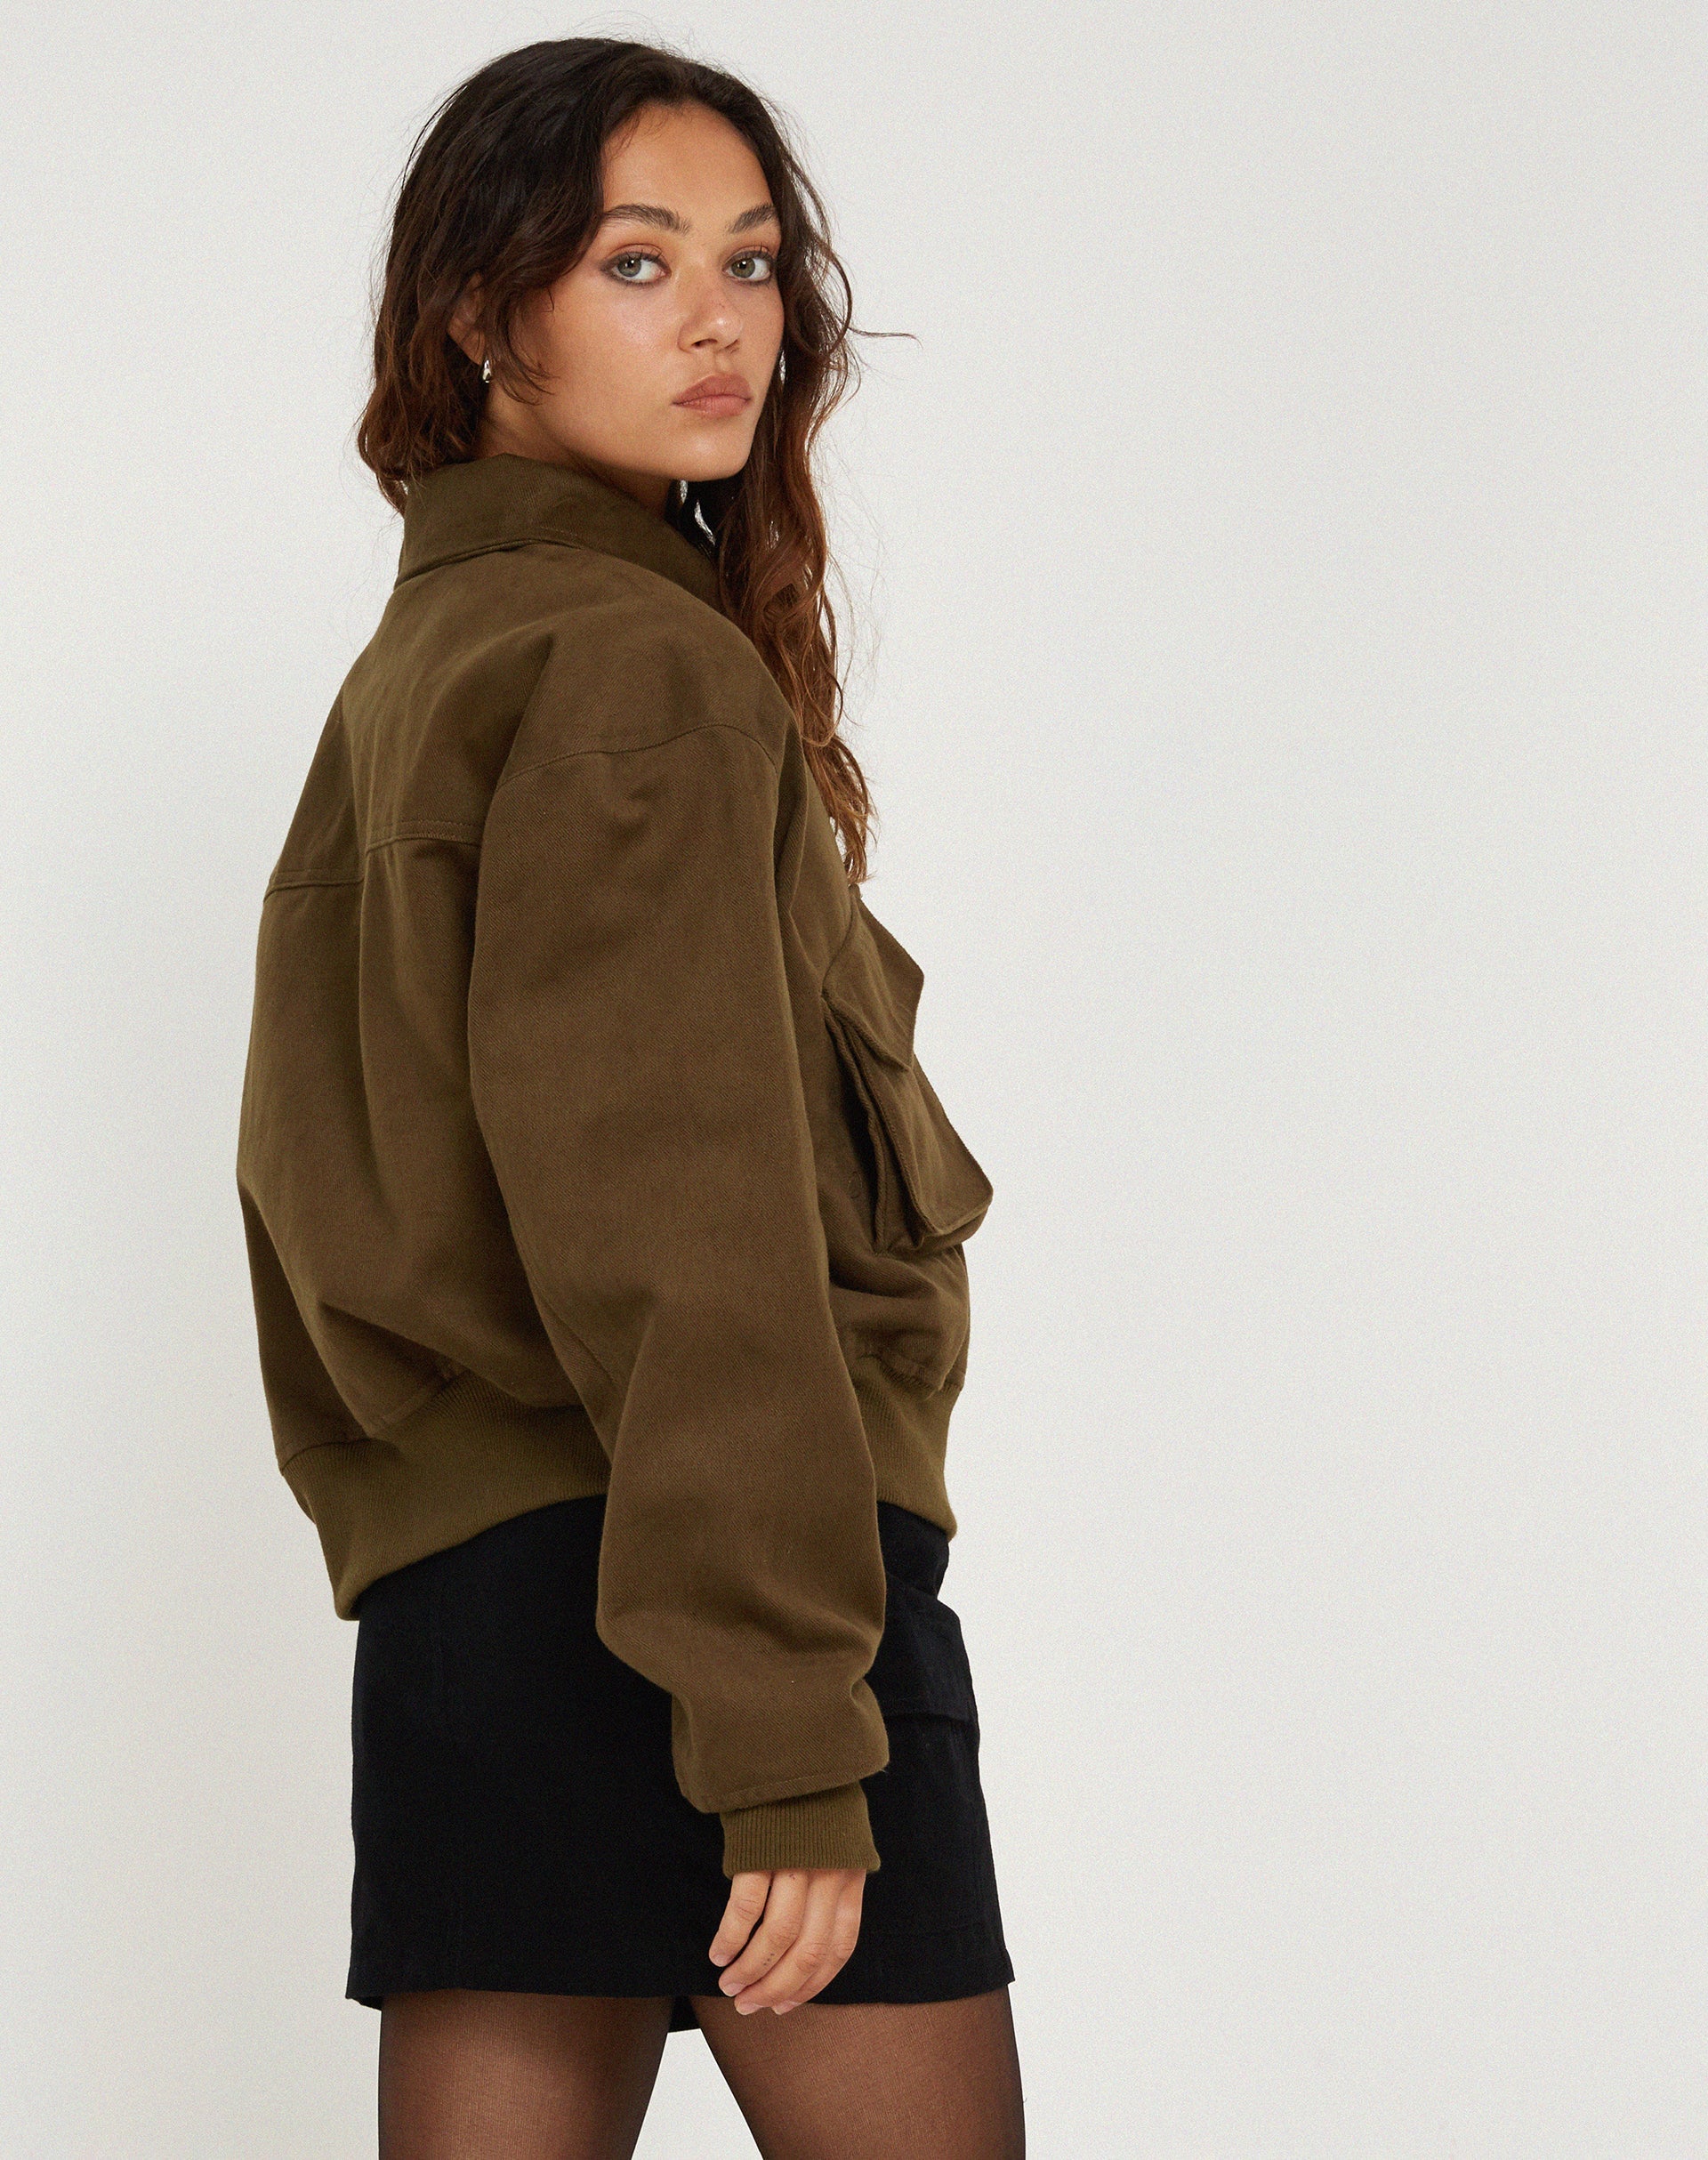 image of MA2 Jacket in Twill Suede Khaki